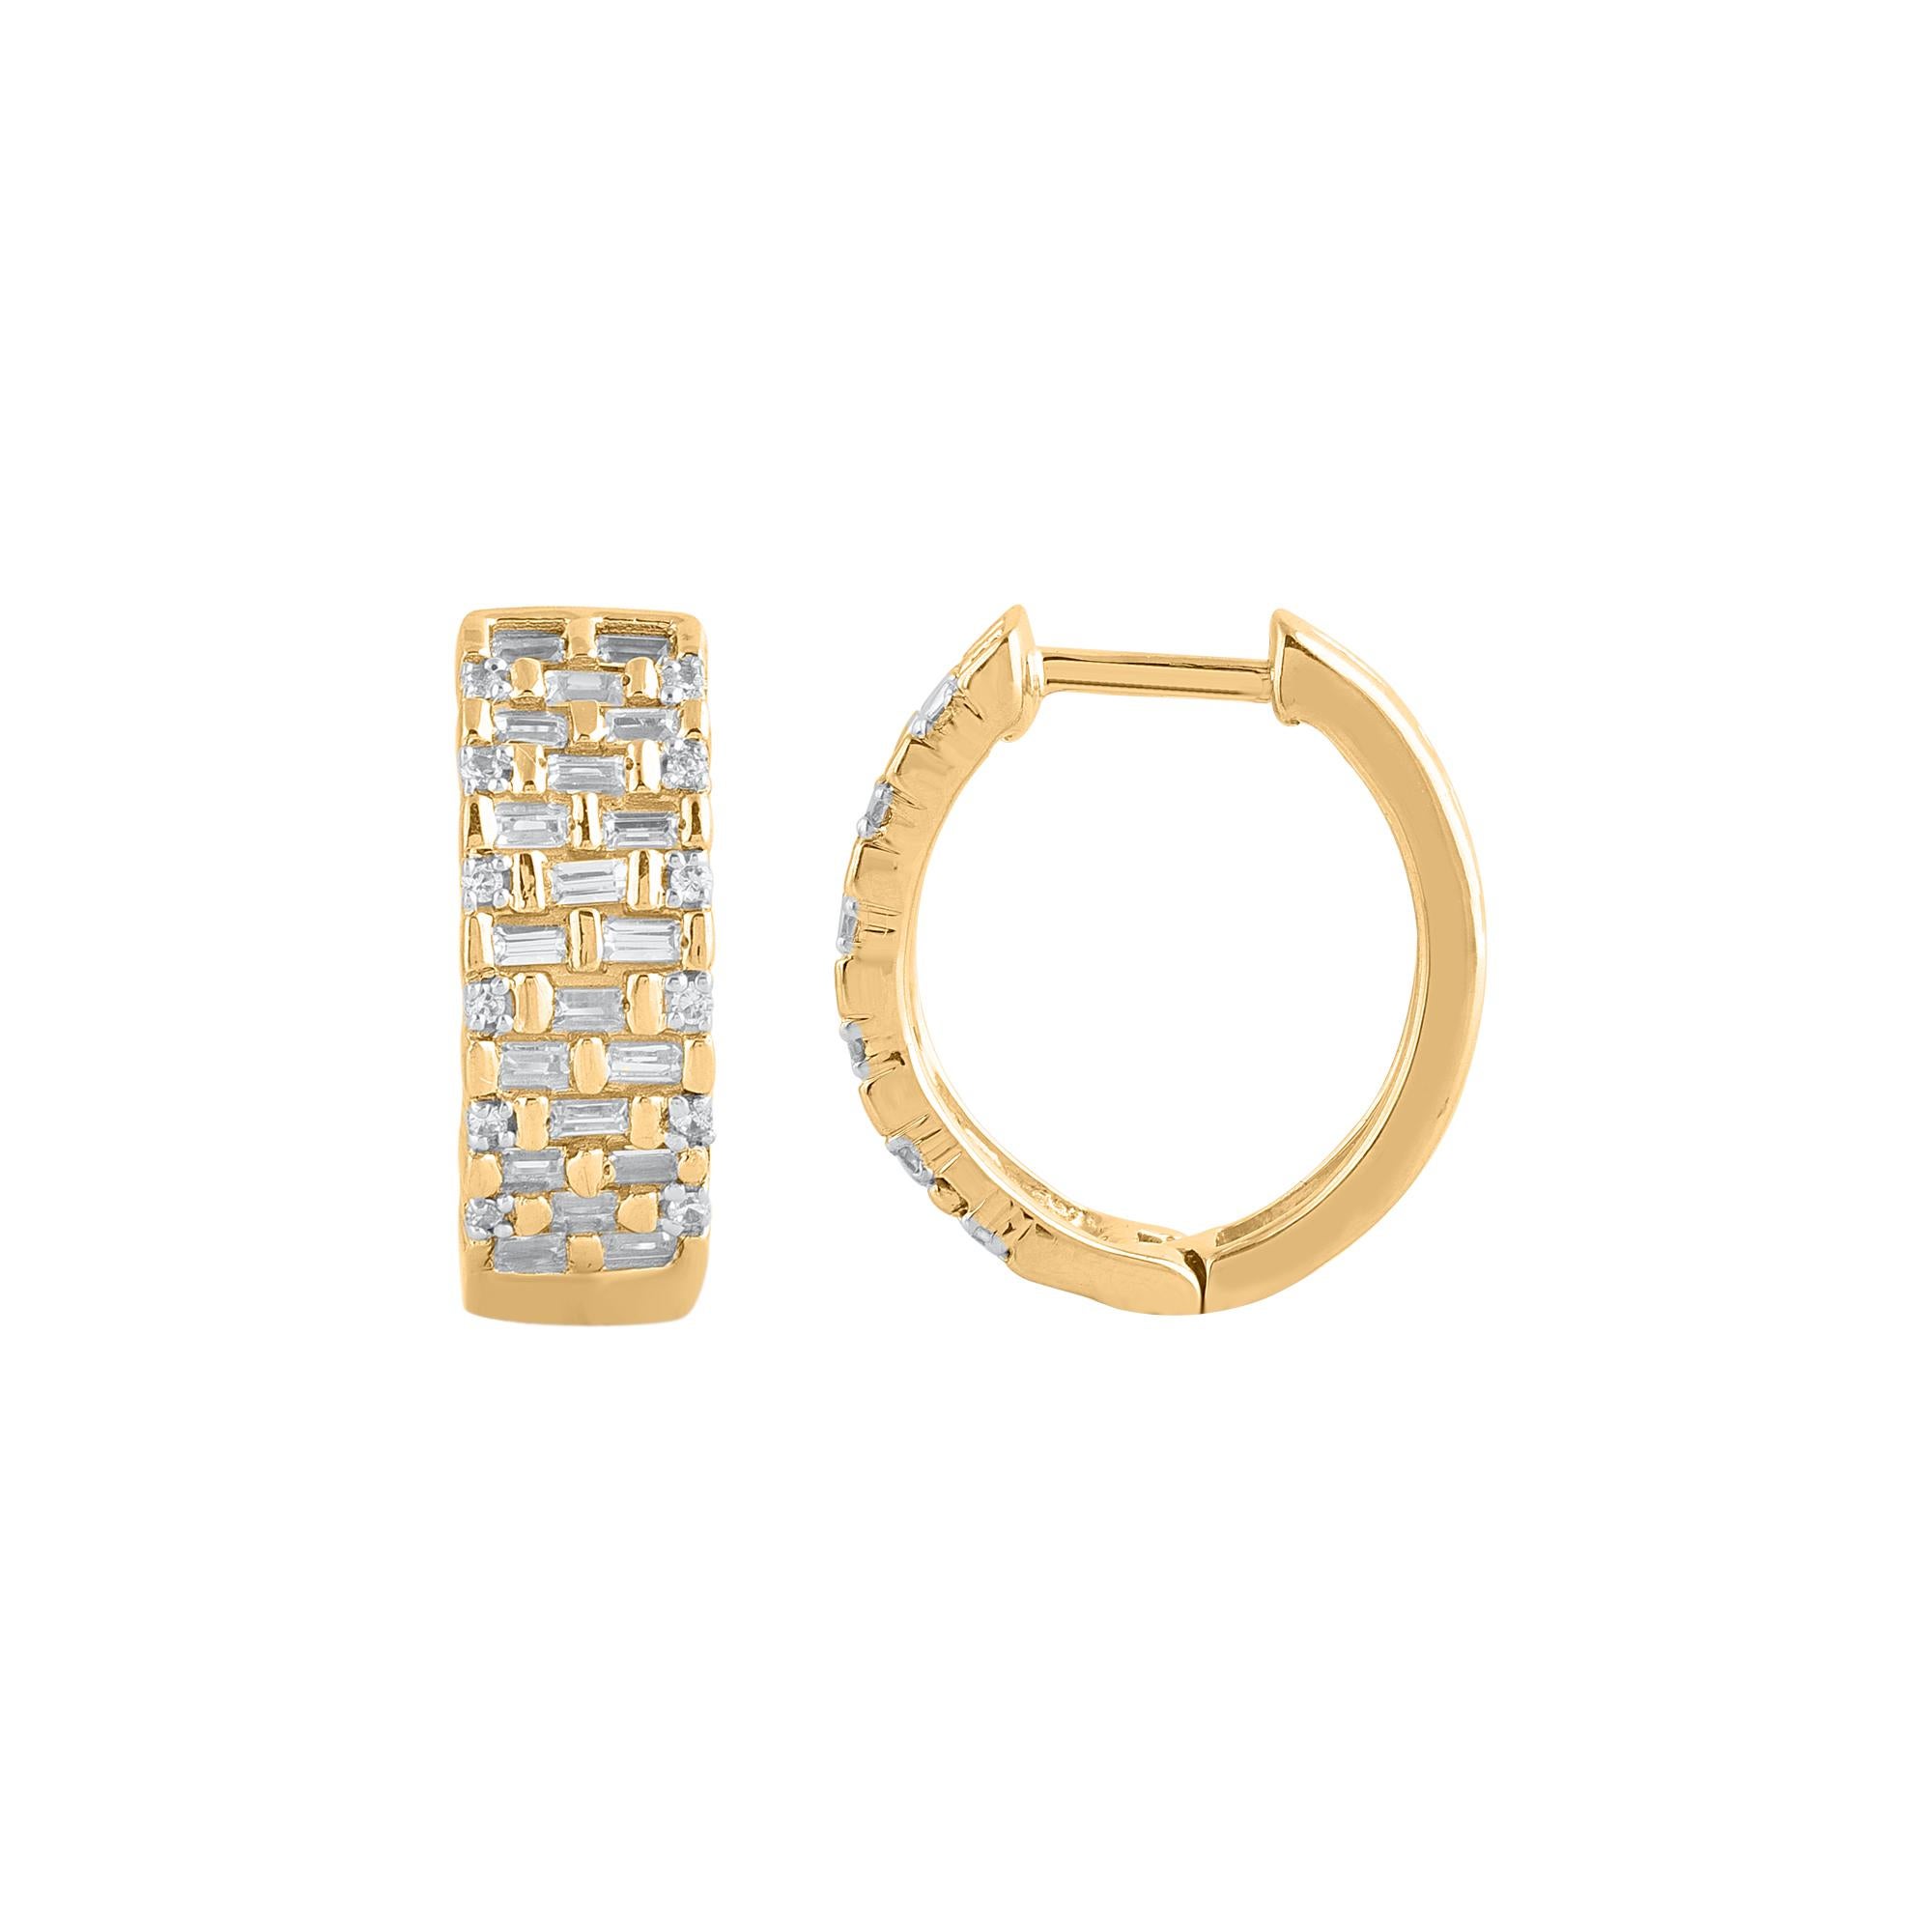 Perfect your weekend looks when you wear these stylish diamond hoop earrings. Crafted in 18 karat yellow gold with 64 brilliant cut & baguette diamond in pave & channel setting. Total diamond weight is 0.75 carat. These earrings secure with hinged